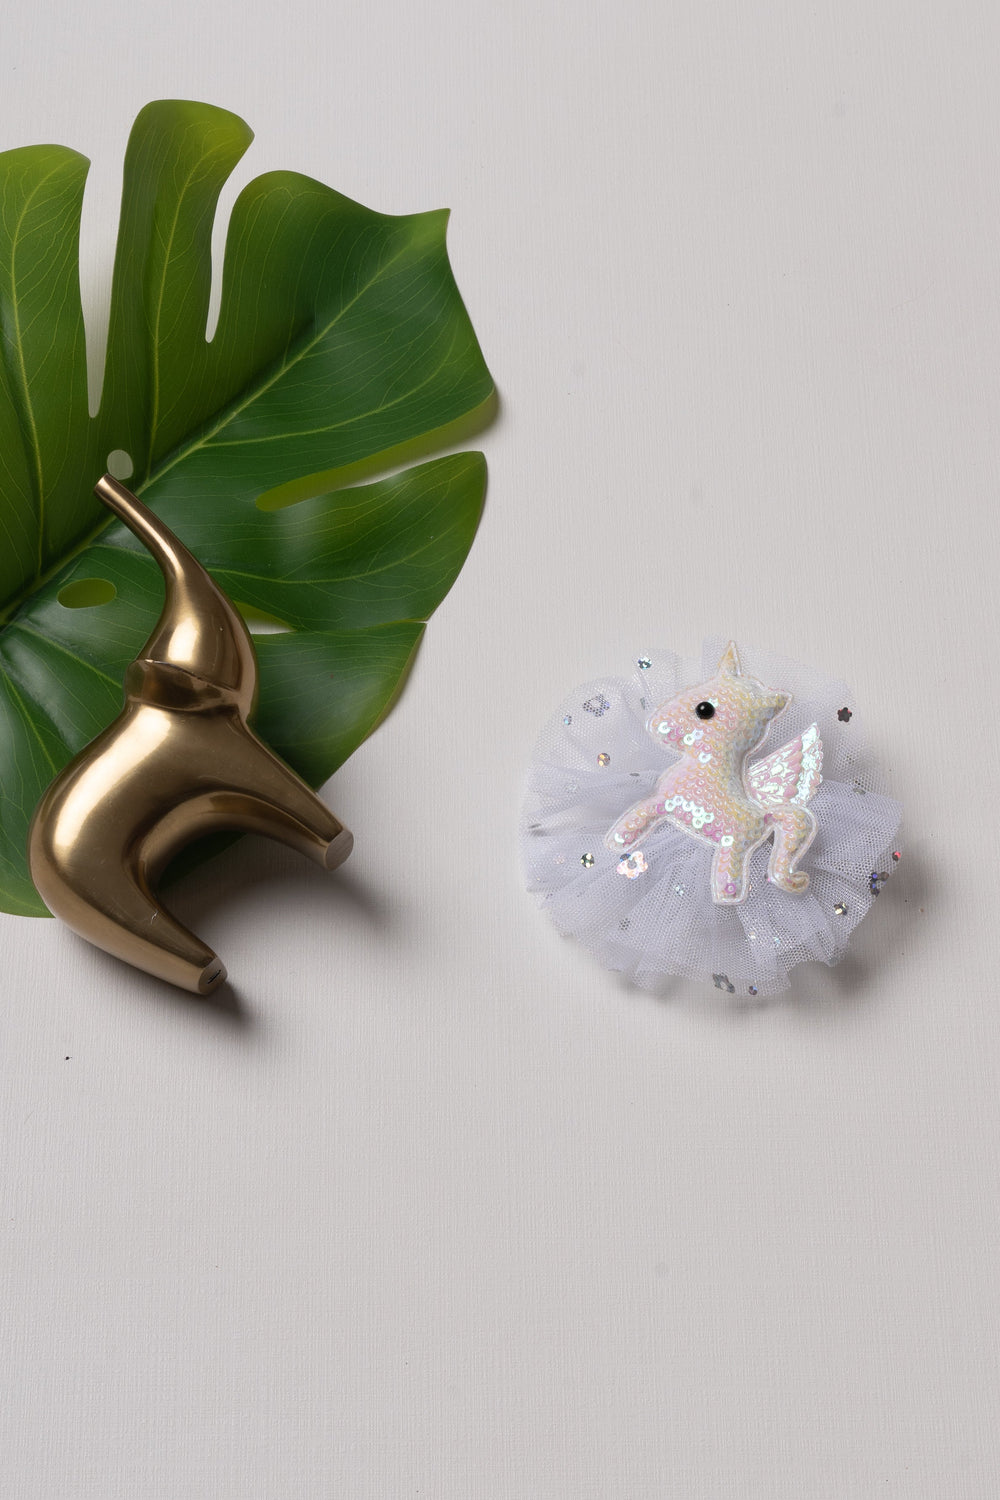 The Nesavu Hair Clip Pastel Pink Sequin Unicorn Hair Clip with Shimmering Tulle Accent Nesavu White JHCL64D Pastel Pink Sequin Unicorn Clip | Kids Shimmering Tulle Hair Accessory | The Nesavu